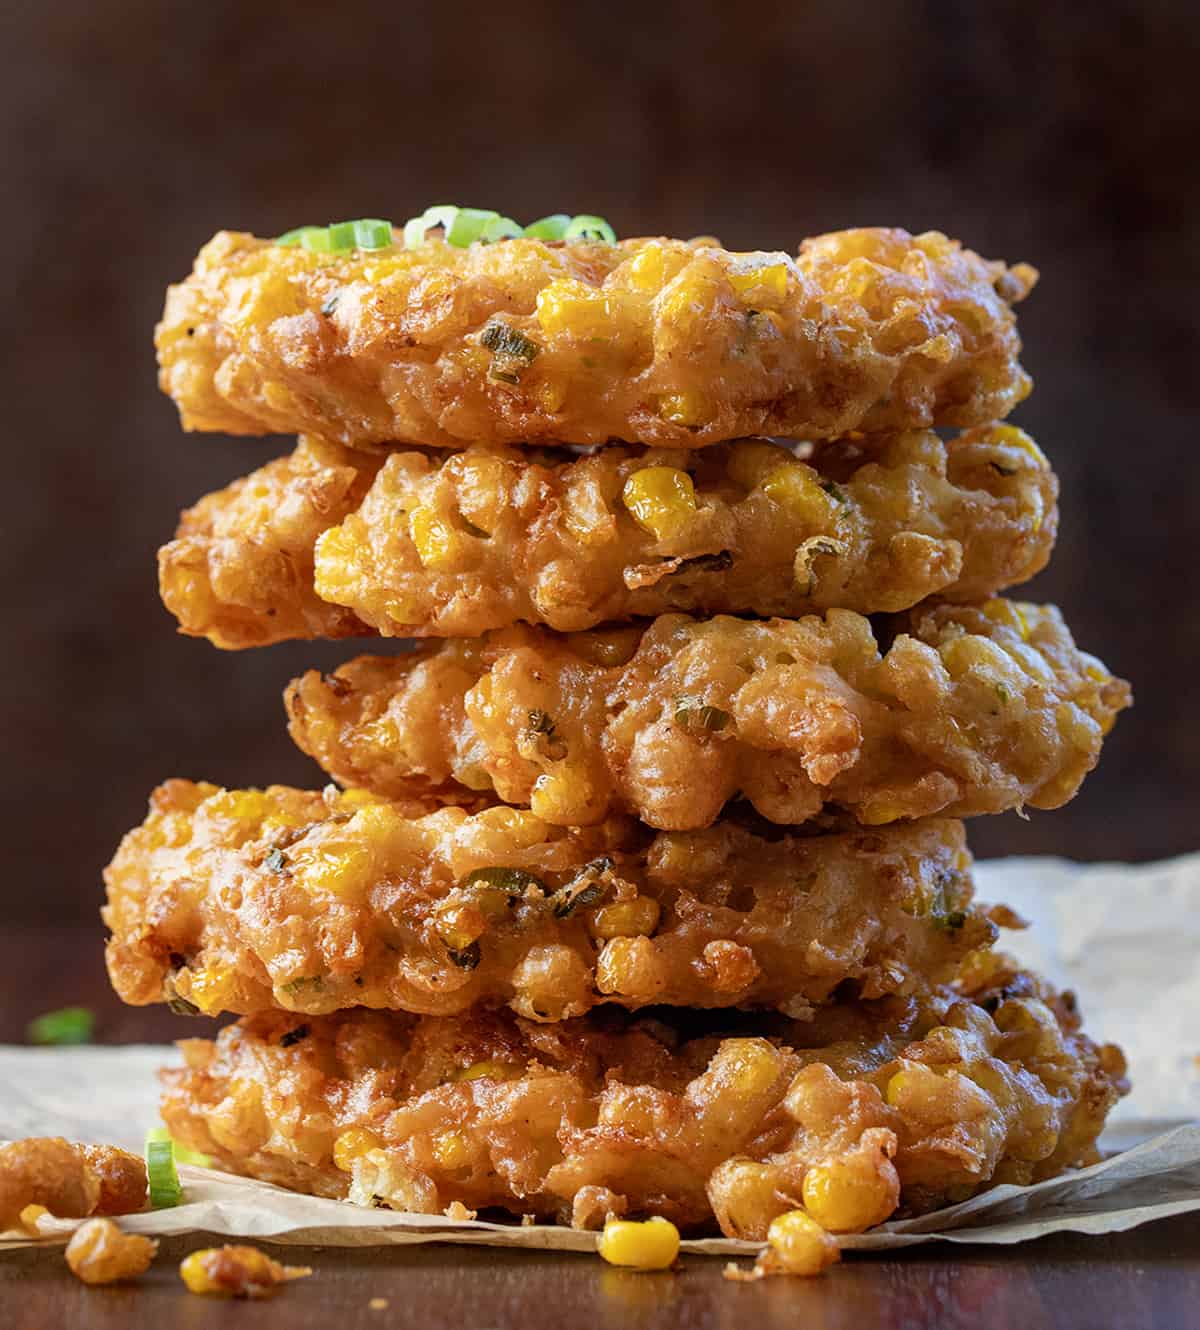 Stack of Corn Fritters on a Dark Counter.